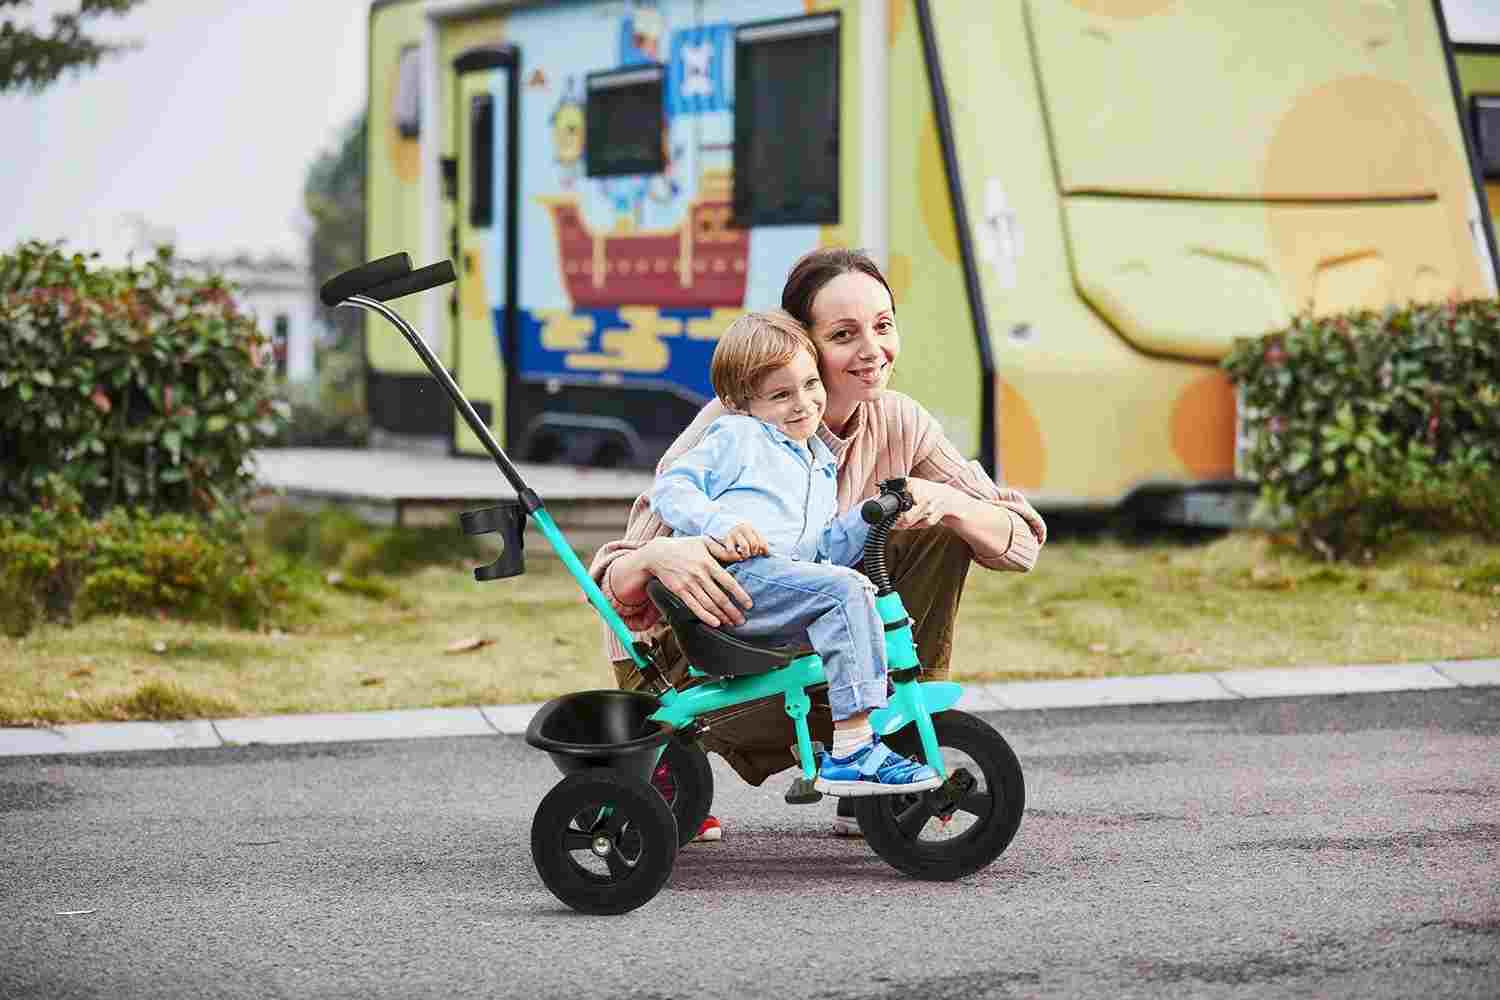 R FOR RABBIT Tiny Toes Grand Baby Tricycle for Kids with Parental Control for 1.5 to 5 Years Kids